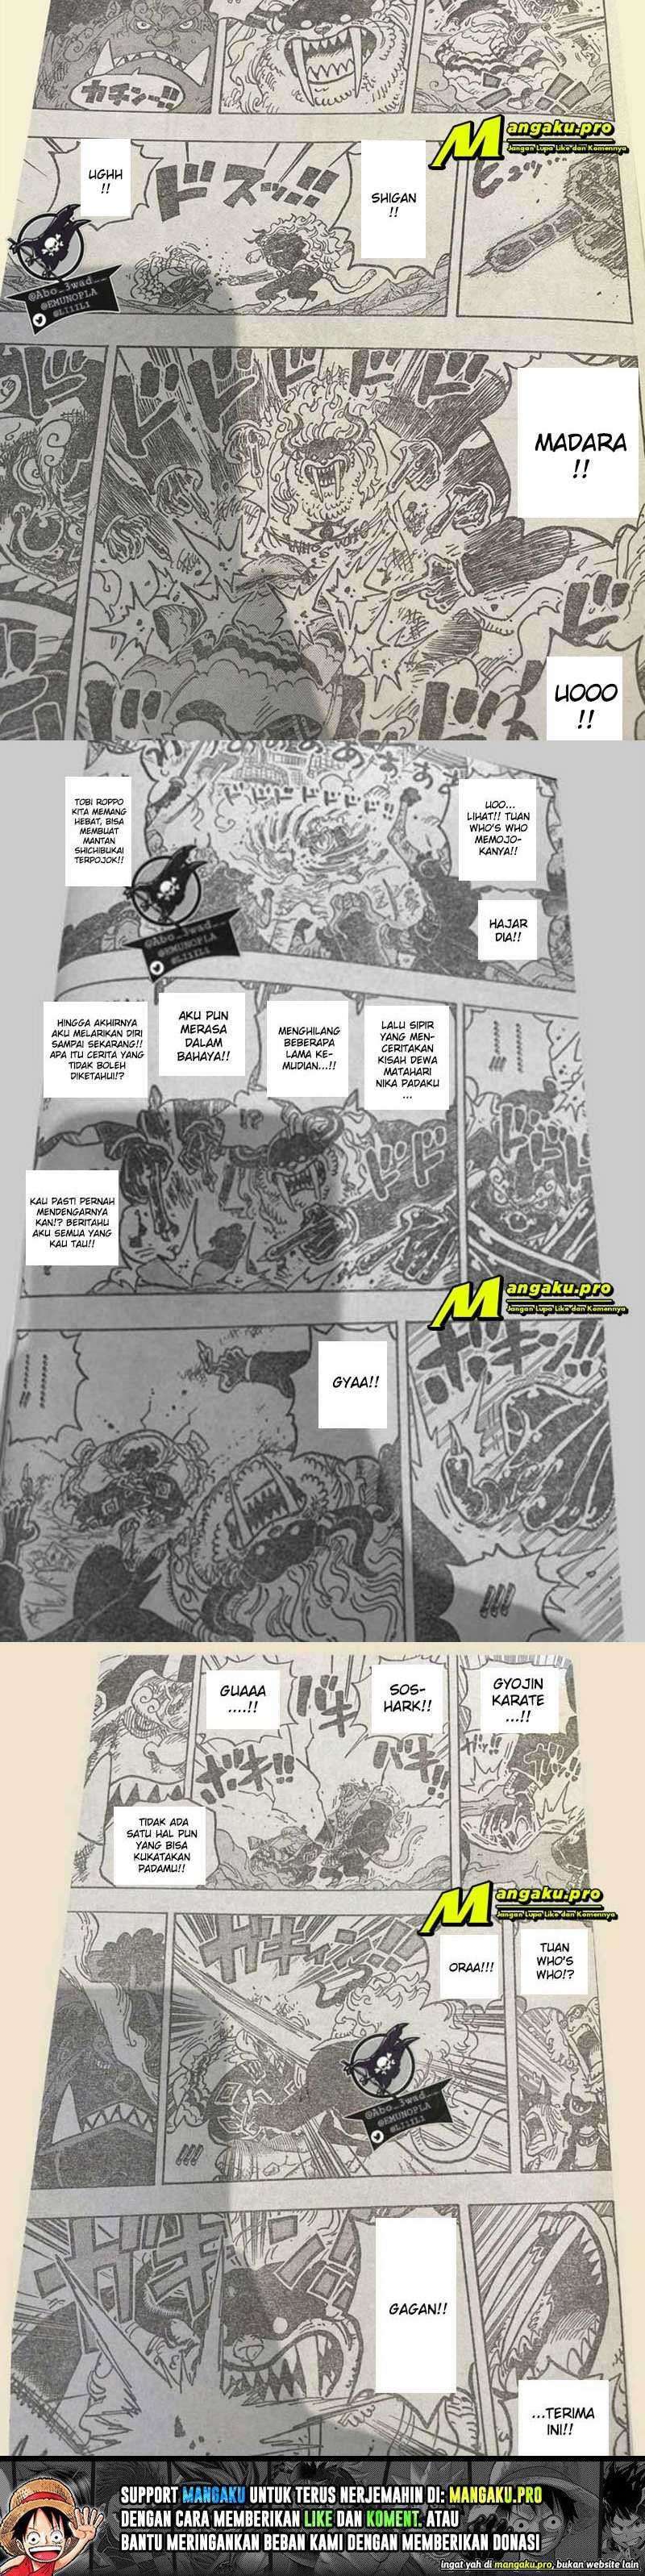 One Piece Chapter 1018 LQ Image 4